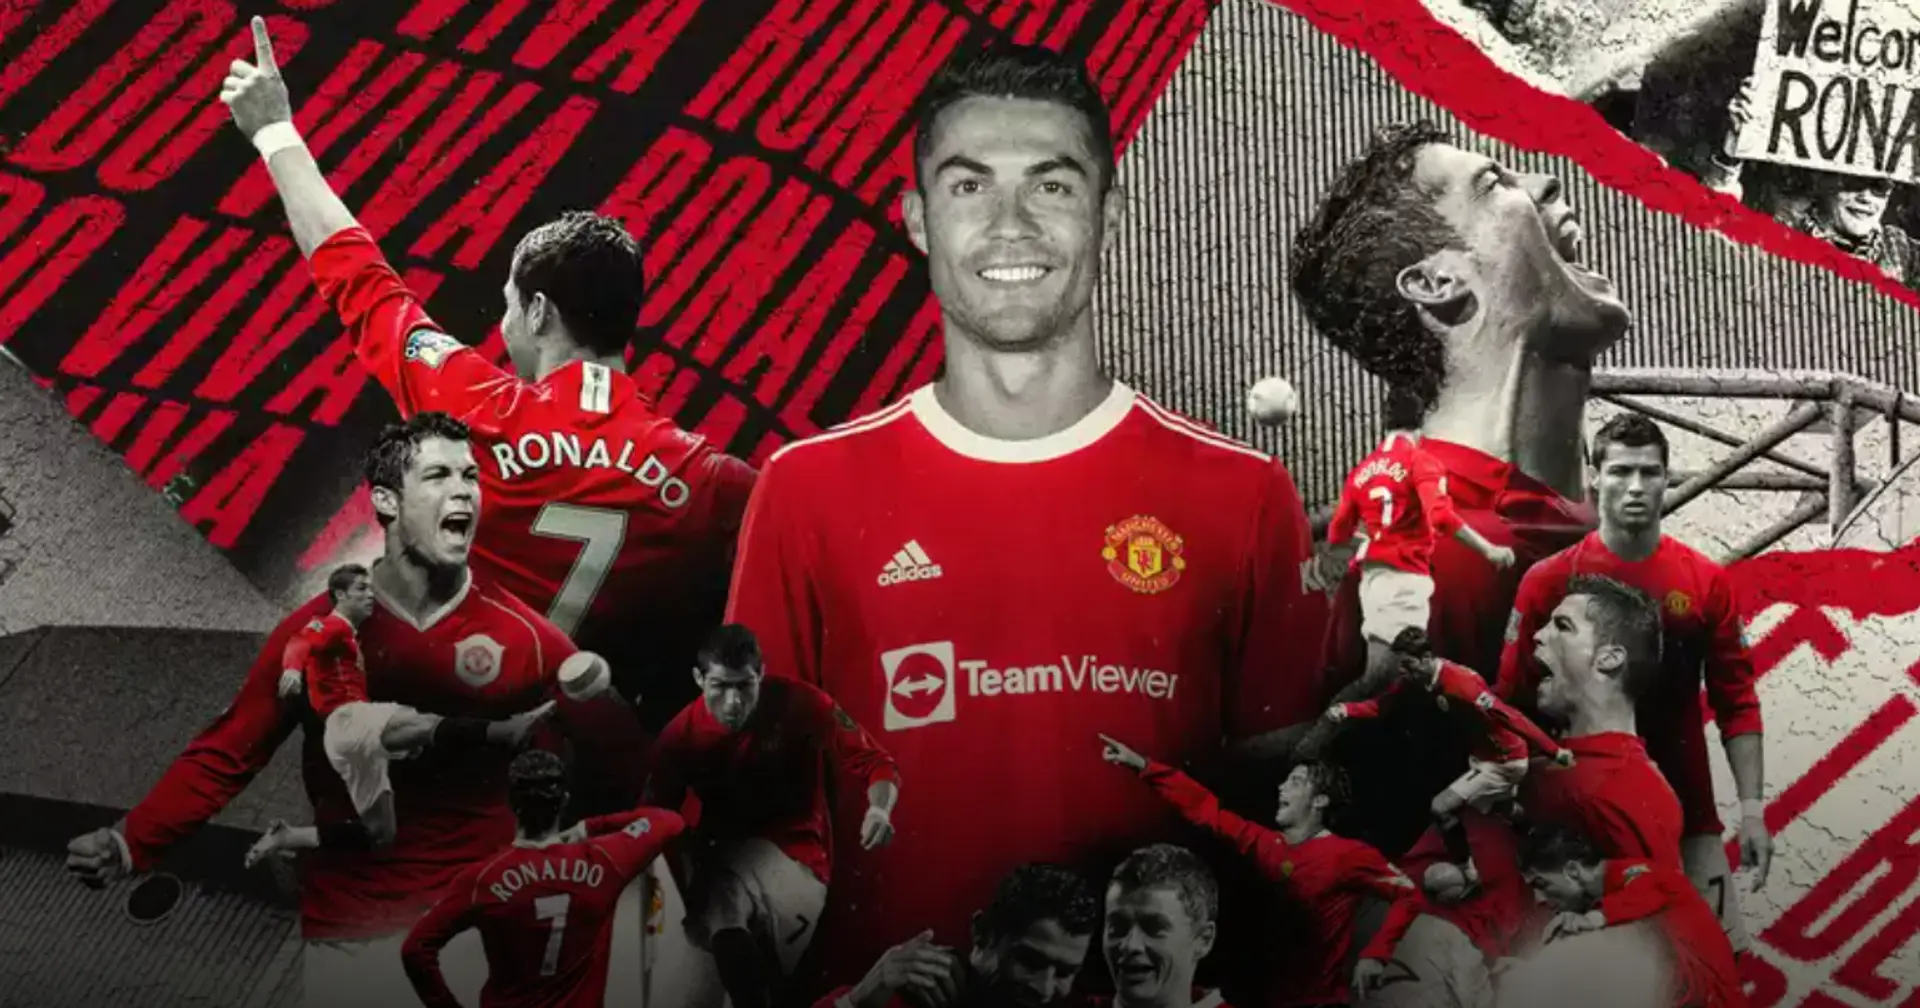 OFFICIAL: Cristiano Ronaldo signs for Manchester United